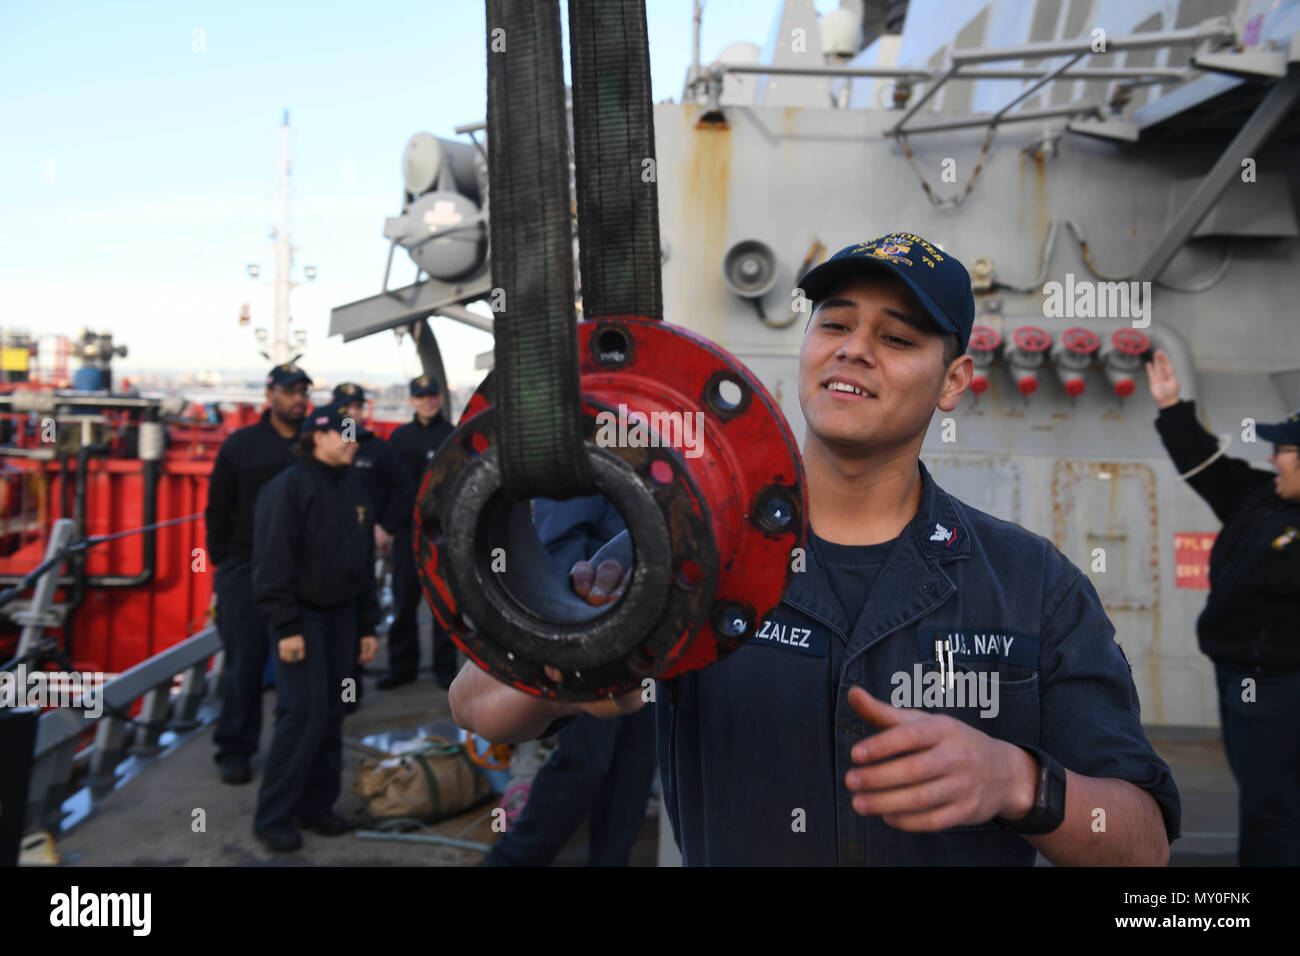 161219-N-JI086-022 - VALENCIA, Spain (Dec. 20, 2016) Petty Officer 3rd Class Enrique Gonzalez, from San Bernardino, Calif., hoists a fuel line adapter aboard the guided-missile destroyer USS Porter (DDG 78) as the ship prepares to take on fuel pier-side in Valencia, Spain, Dec. 20, 2016. Porter, forward-deployed to Rota, Spain, is conducting naval operations in the U.S. 6th Fleet area of operations in support of U.S. national security interests in Europe. (U.S. Navy photo by Seaman Ford Williams/Released) Stock Photo